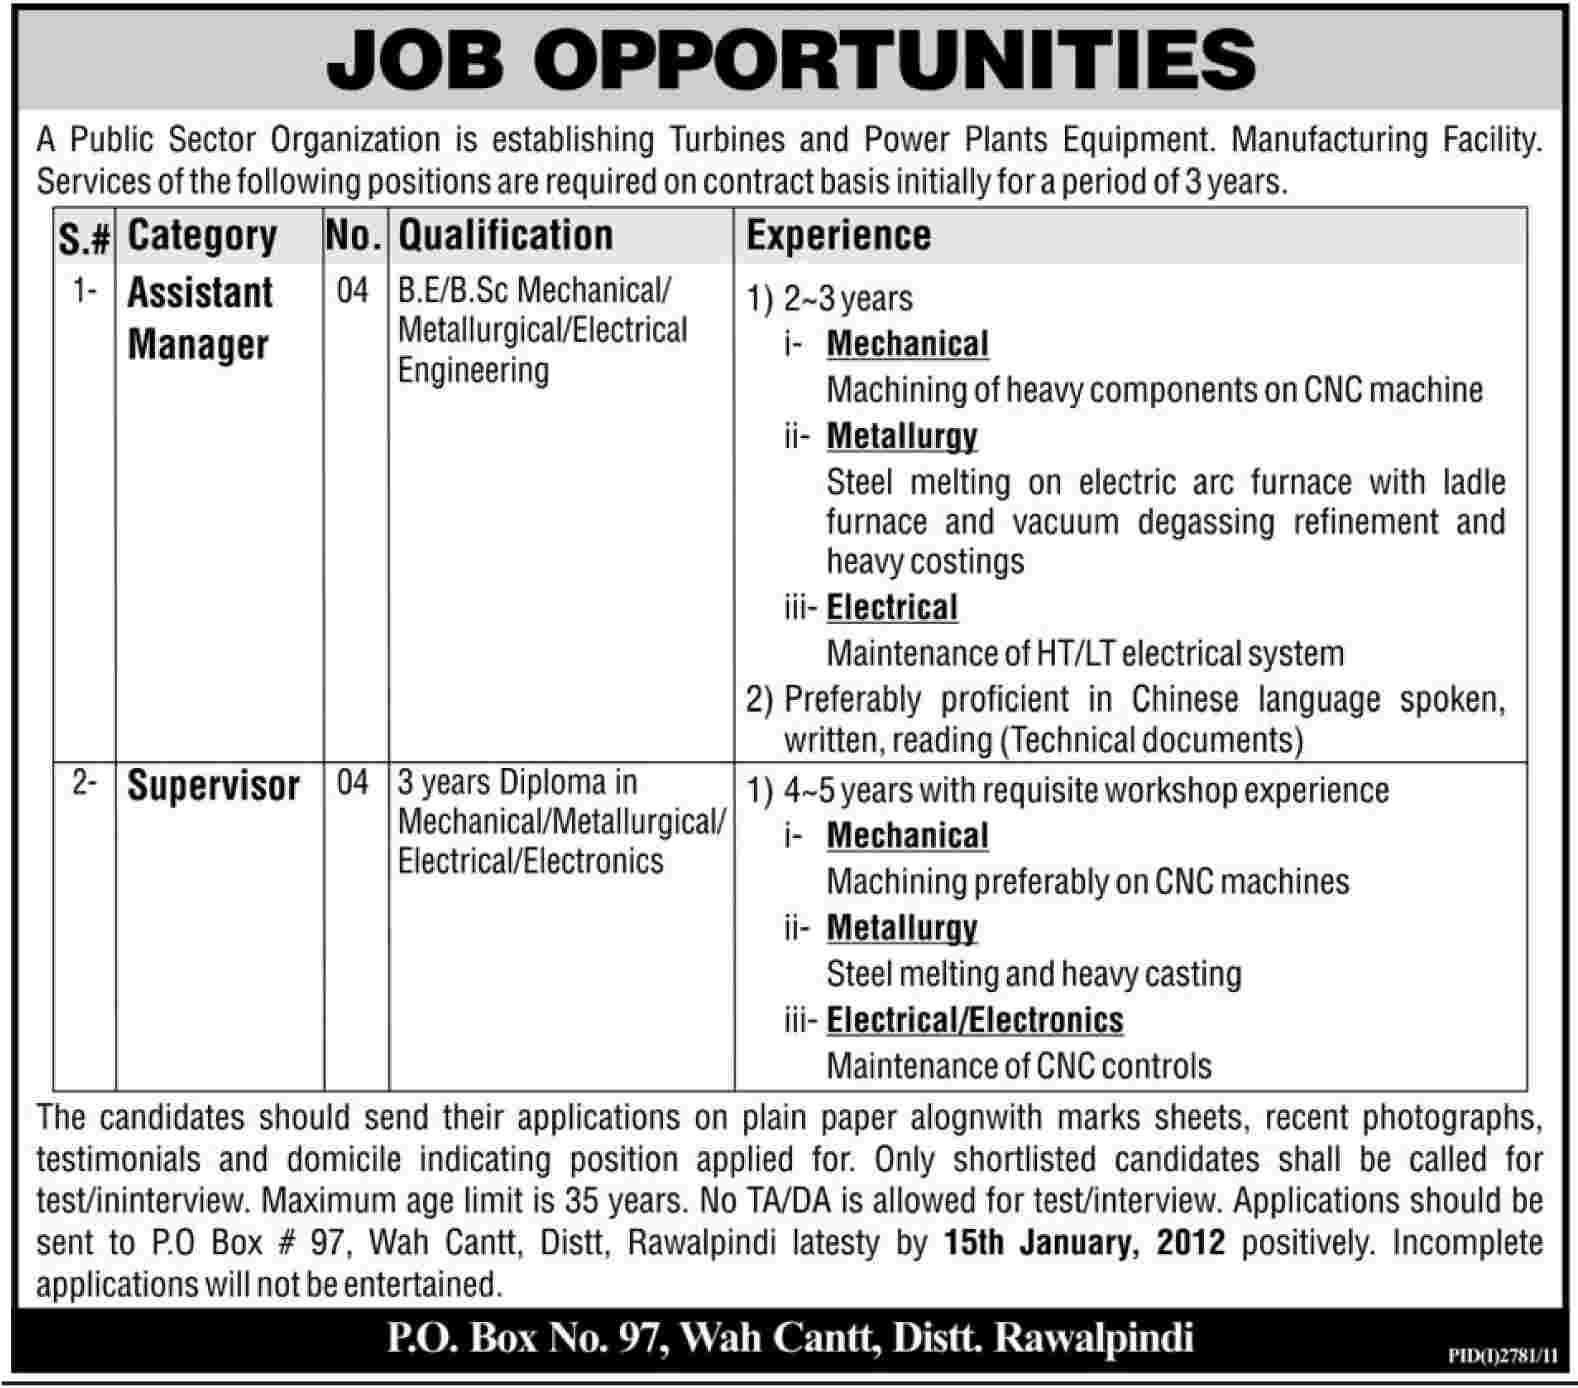 Public Sector Organization Required Assistant Managers and Supervisors